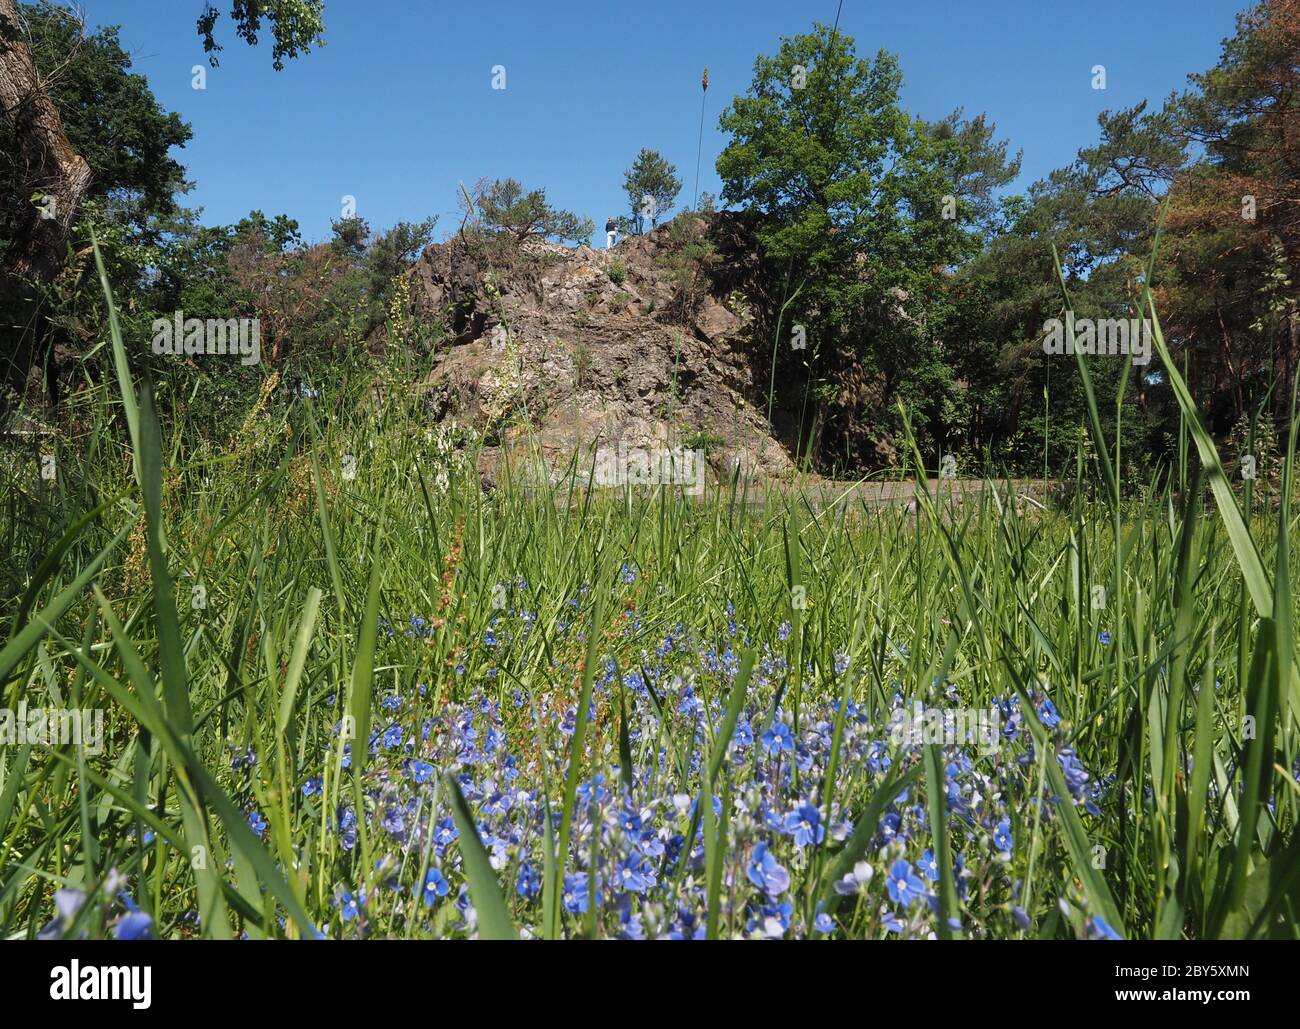 01 June 2020, Brandenburg, Uebigau-Wahrenbrück: The Rothstein Rock in a wooded area in the Brandenburg district of Elbe-Elster northeast of Bad Liebenwerda behind a meadow with flowers of the species Gamander speedwell (Veronica chamaedrys) or Männertreu. The natural rock near the village of Rothstein consists of Grauwacke (sedimentary rock) and has been protected as a natural monument since 1915. According to the Berlin-Brandenburg climbing and bouldering guide, 30 climbing routes of difficulty levels 1 to 8 (UIAA) lead to the summit of the approximately 15-metre-high rock, which are partiall Stock Photo